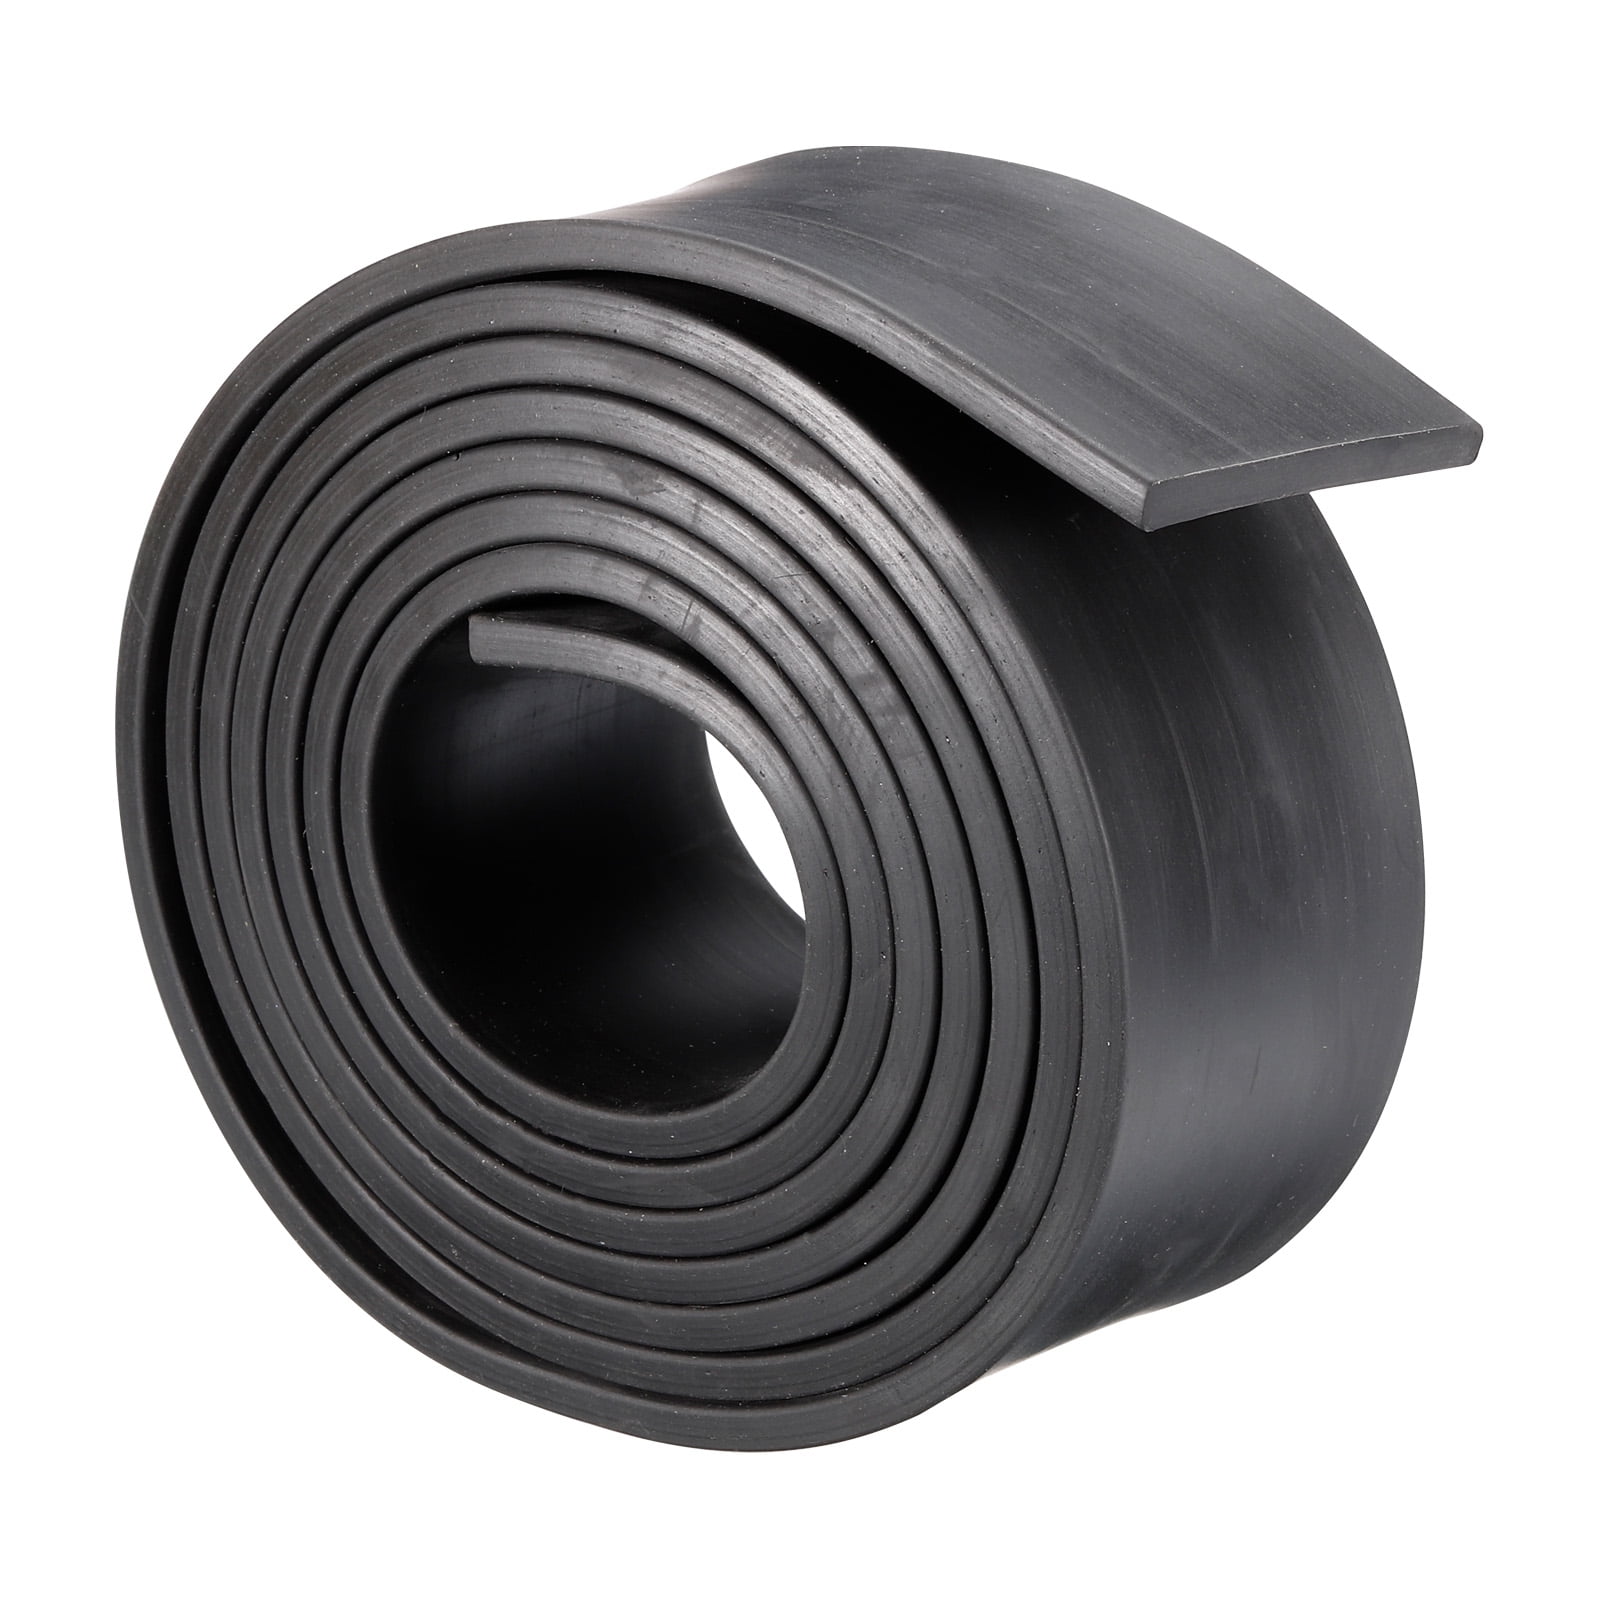 Neoprene Rubber Sheet 1/8 Thick x 16 Wide x 30 Long, Solid Rubber  Sheets, Rolls & Strips for Gaskets Material, Pads, Crafts, Weather  Stripping